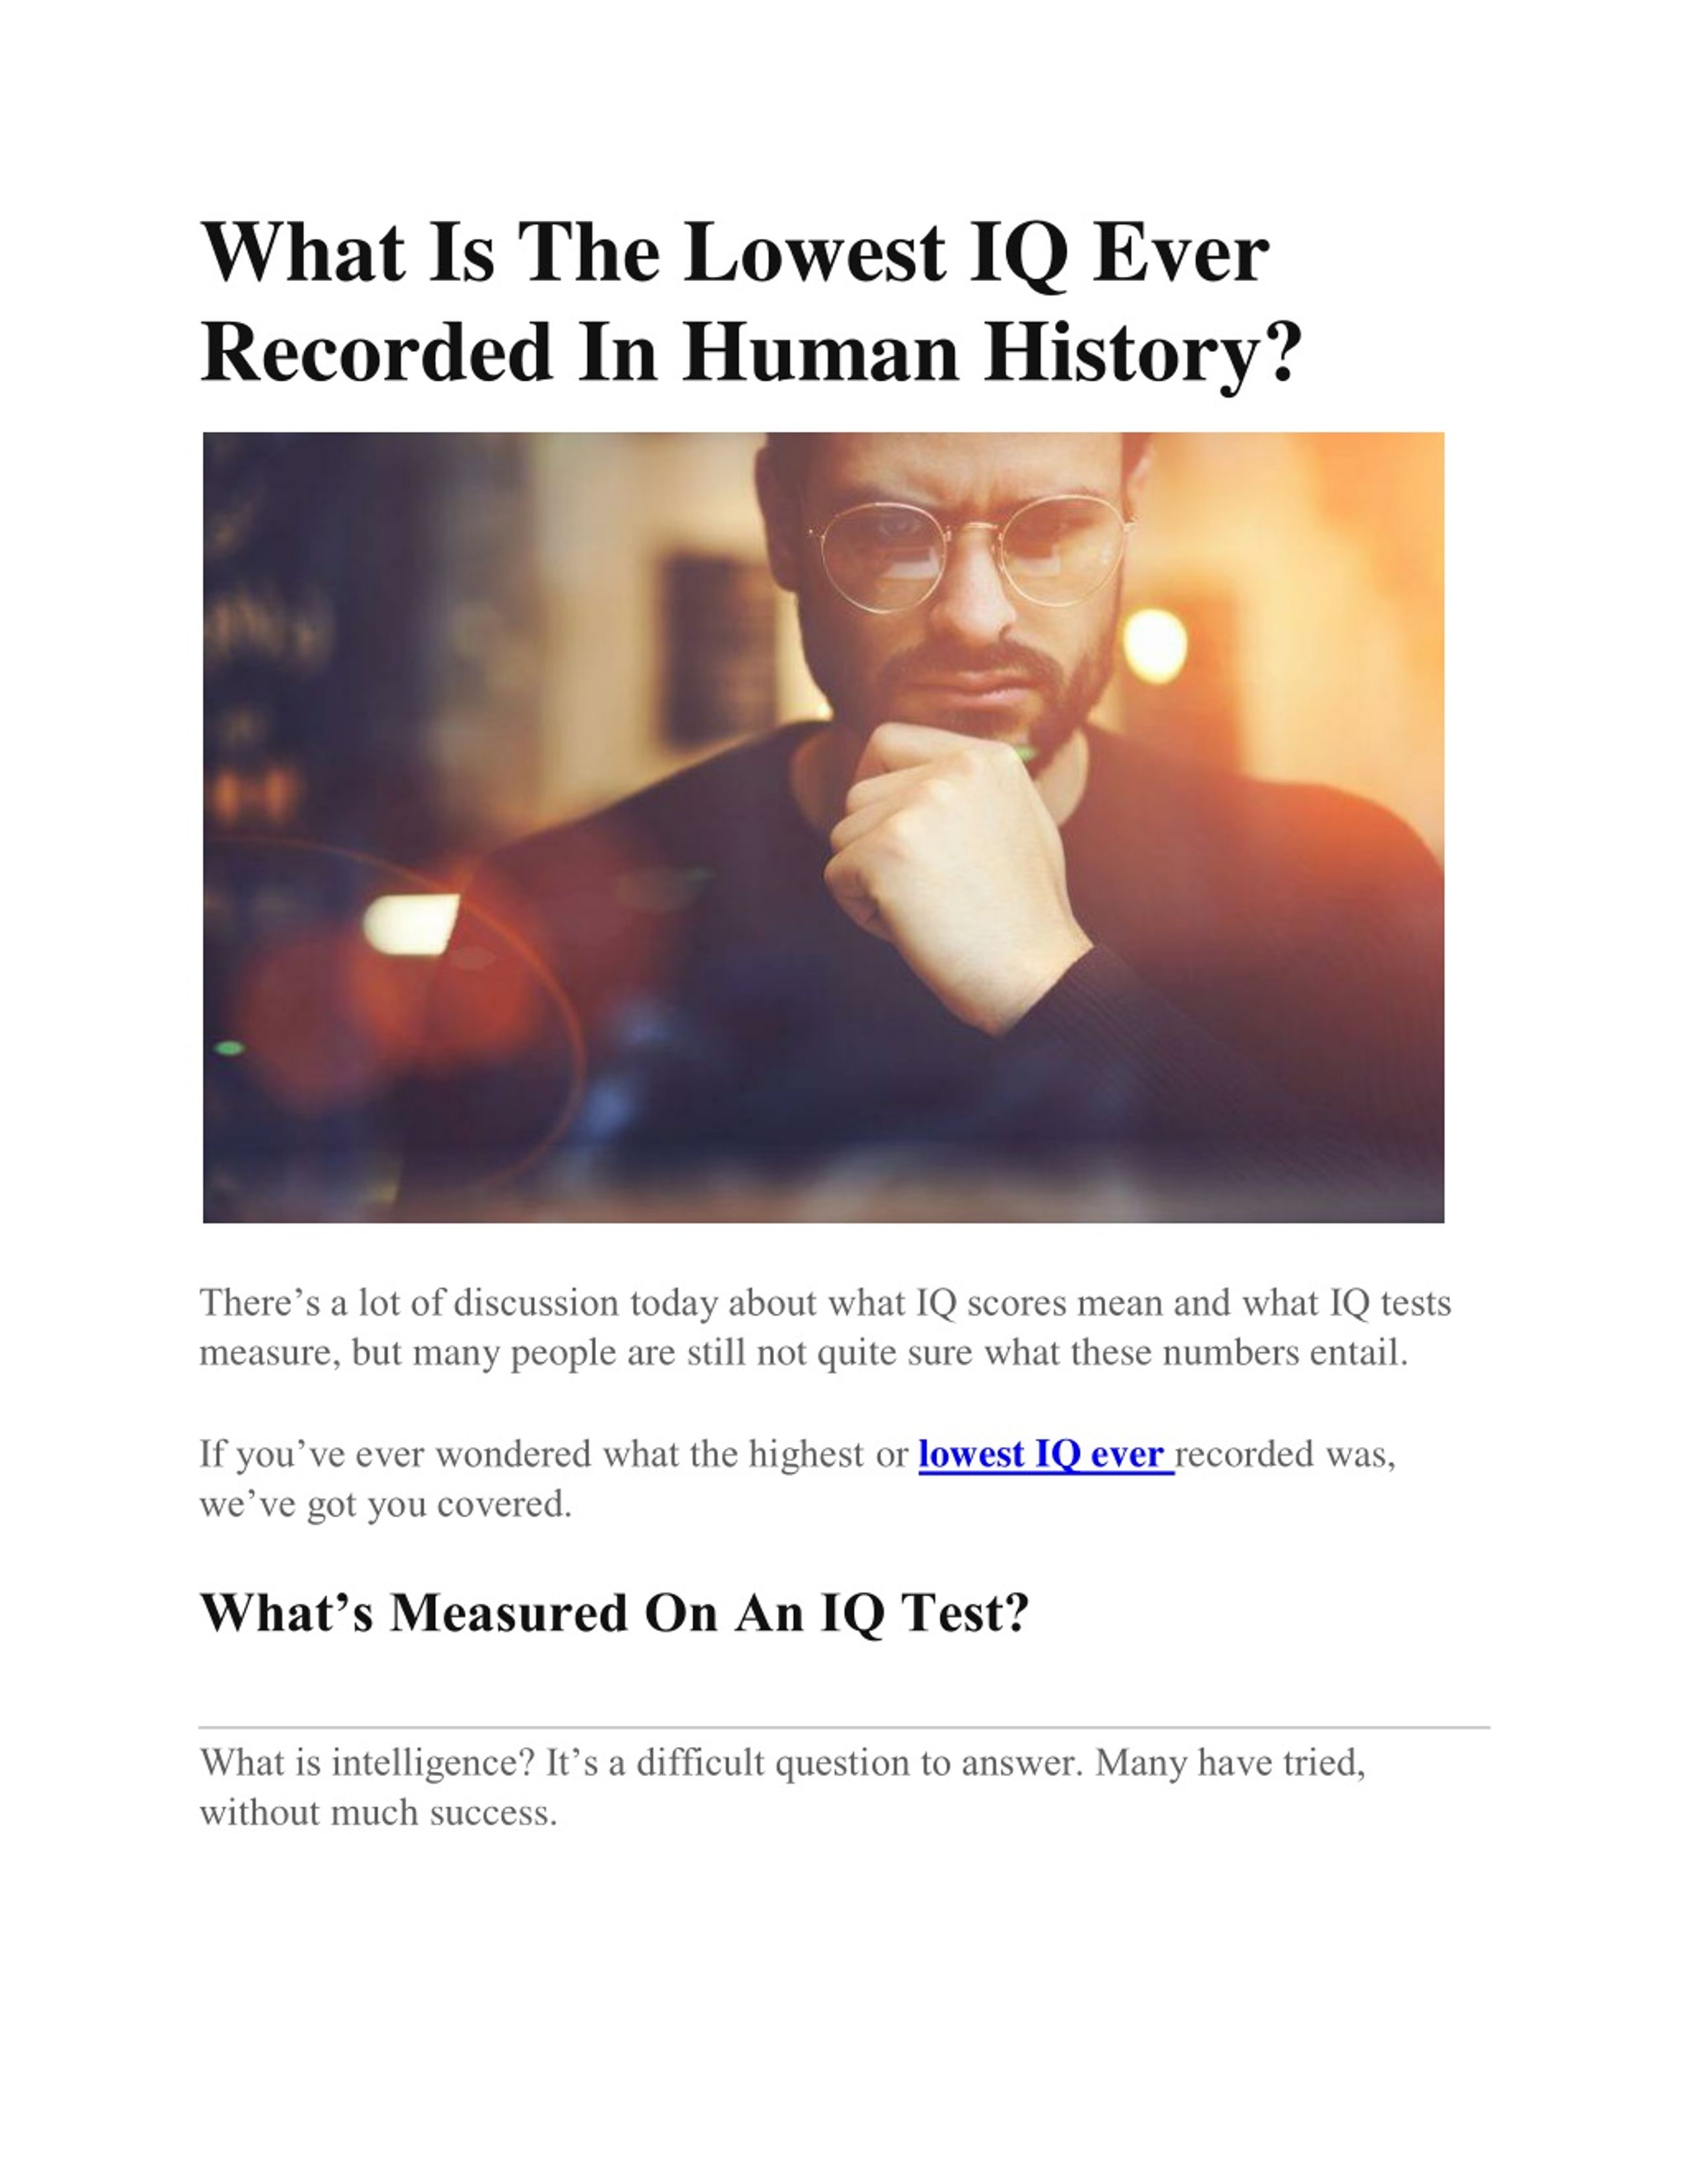 Highest Recorded IQ Ever in the History of the World